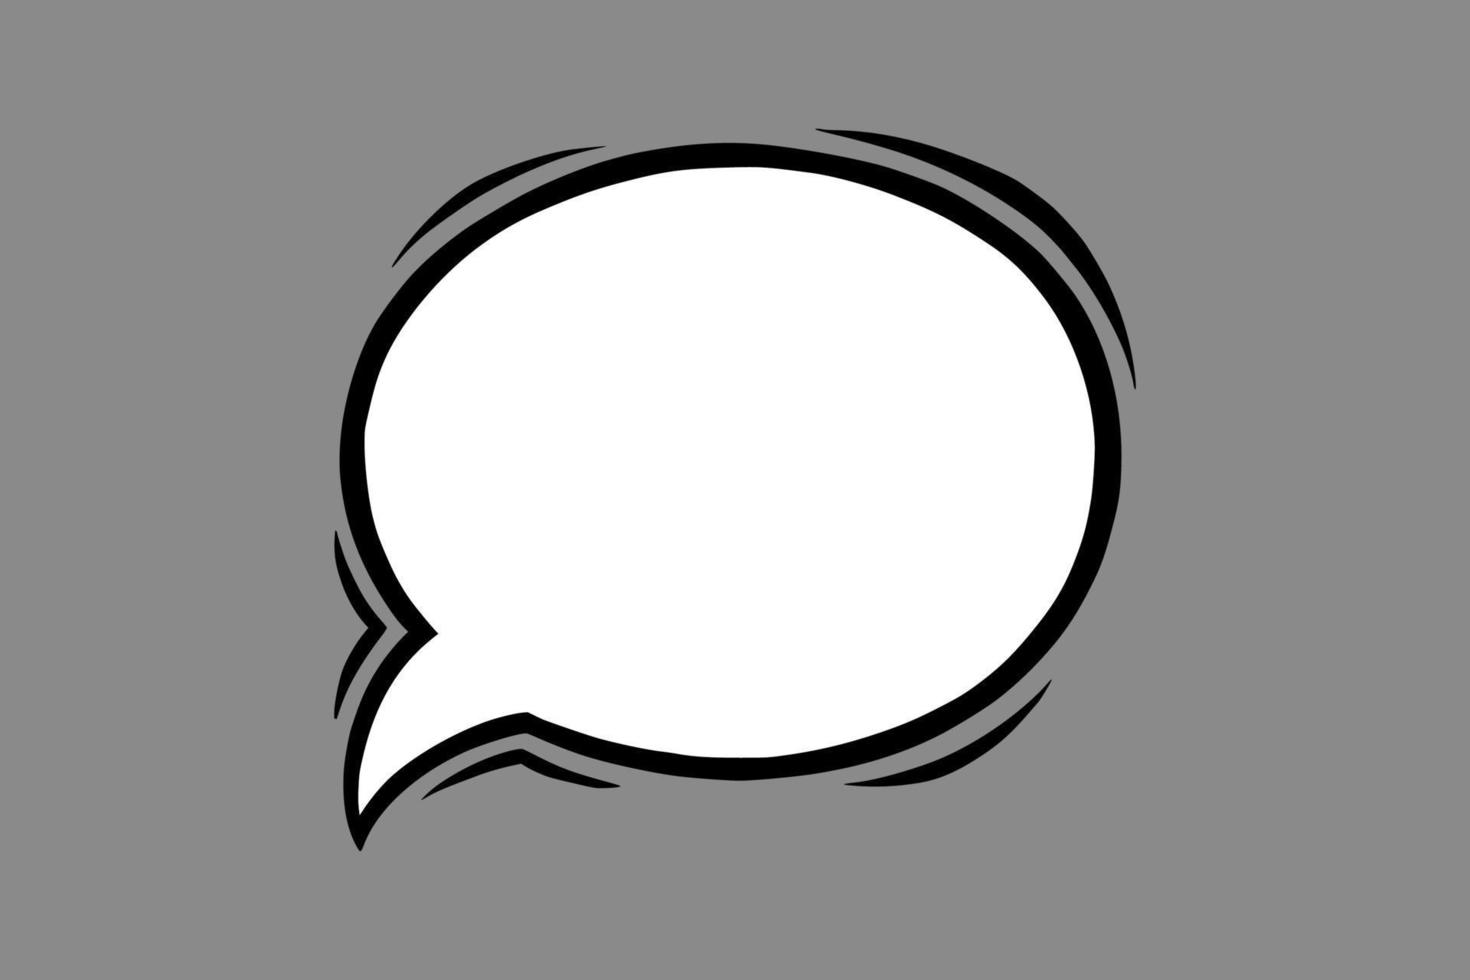 Round speech bubble in comic style. Oval speech bubble isolated in grey background. Vector illustration